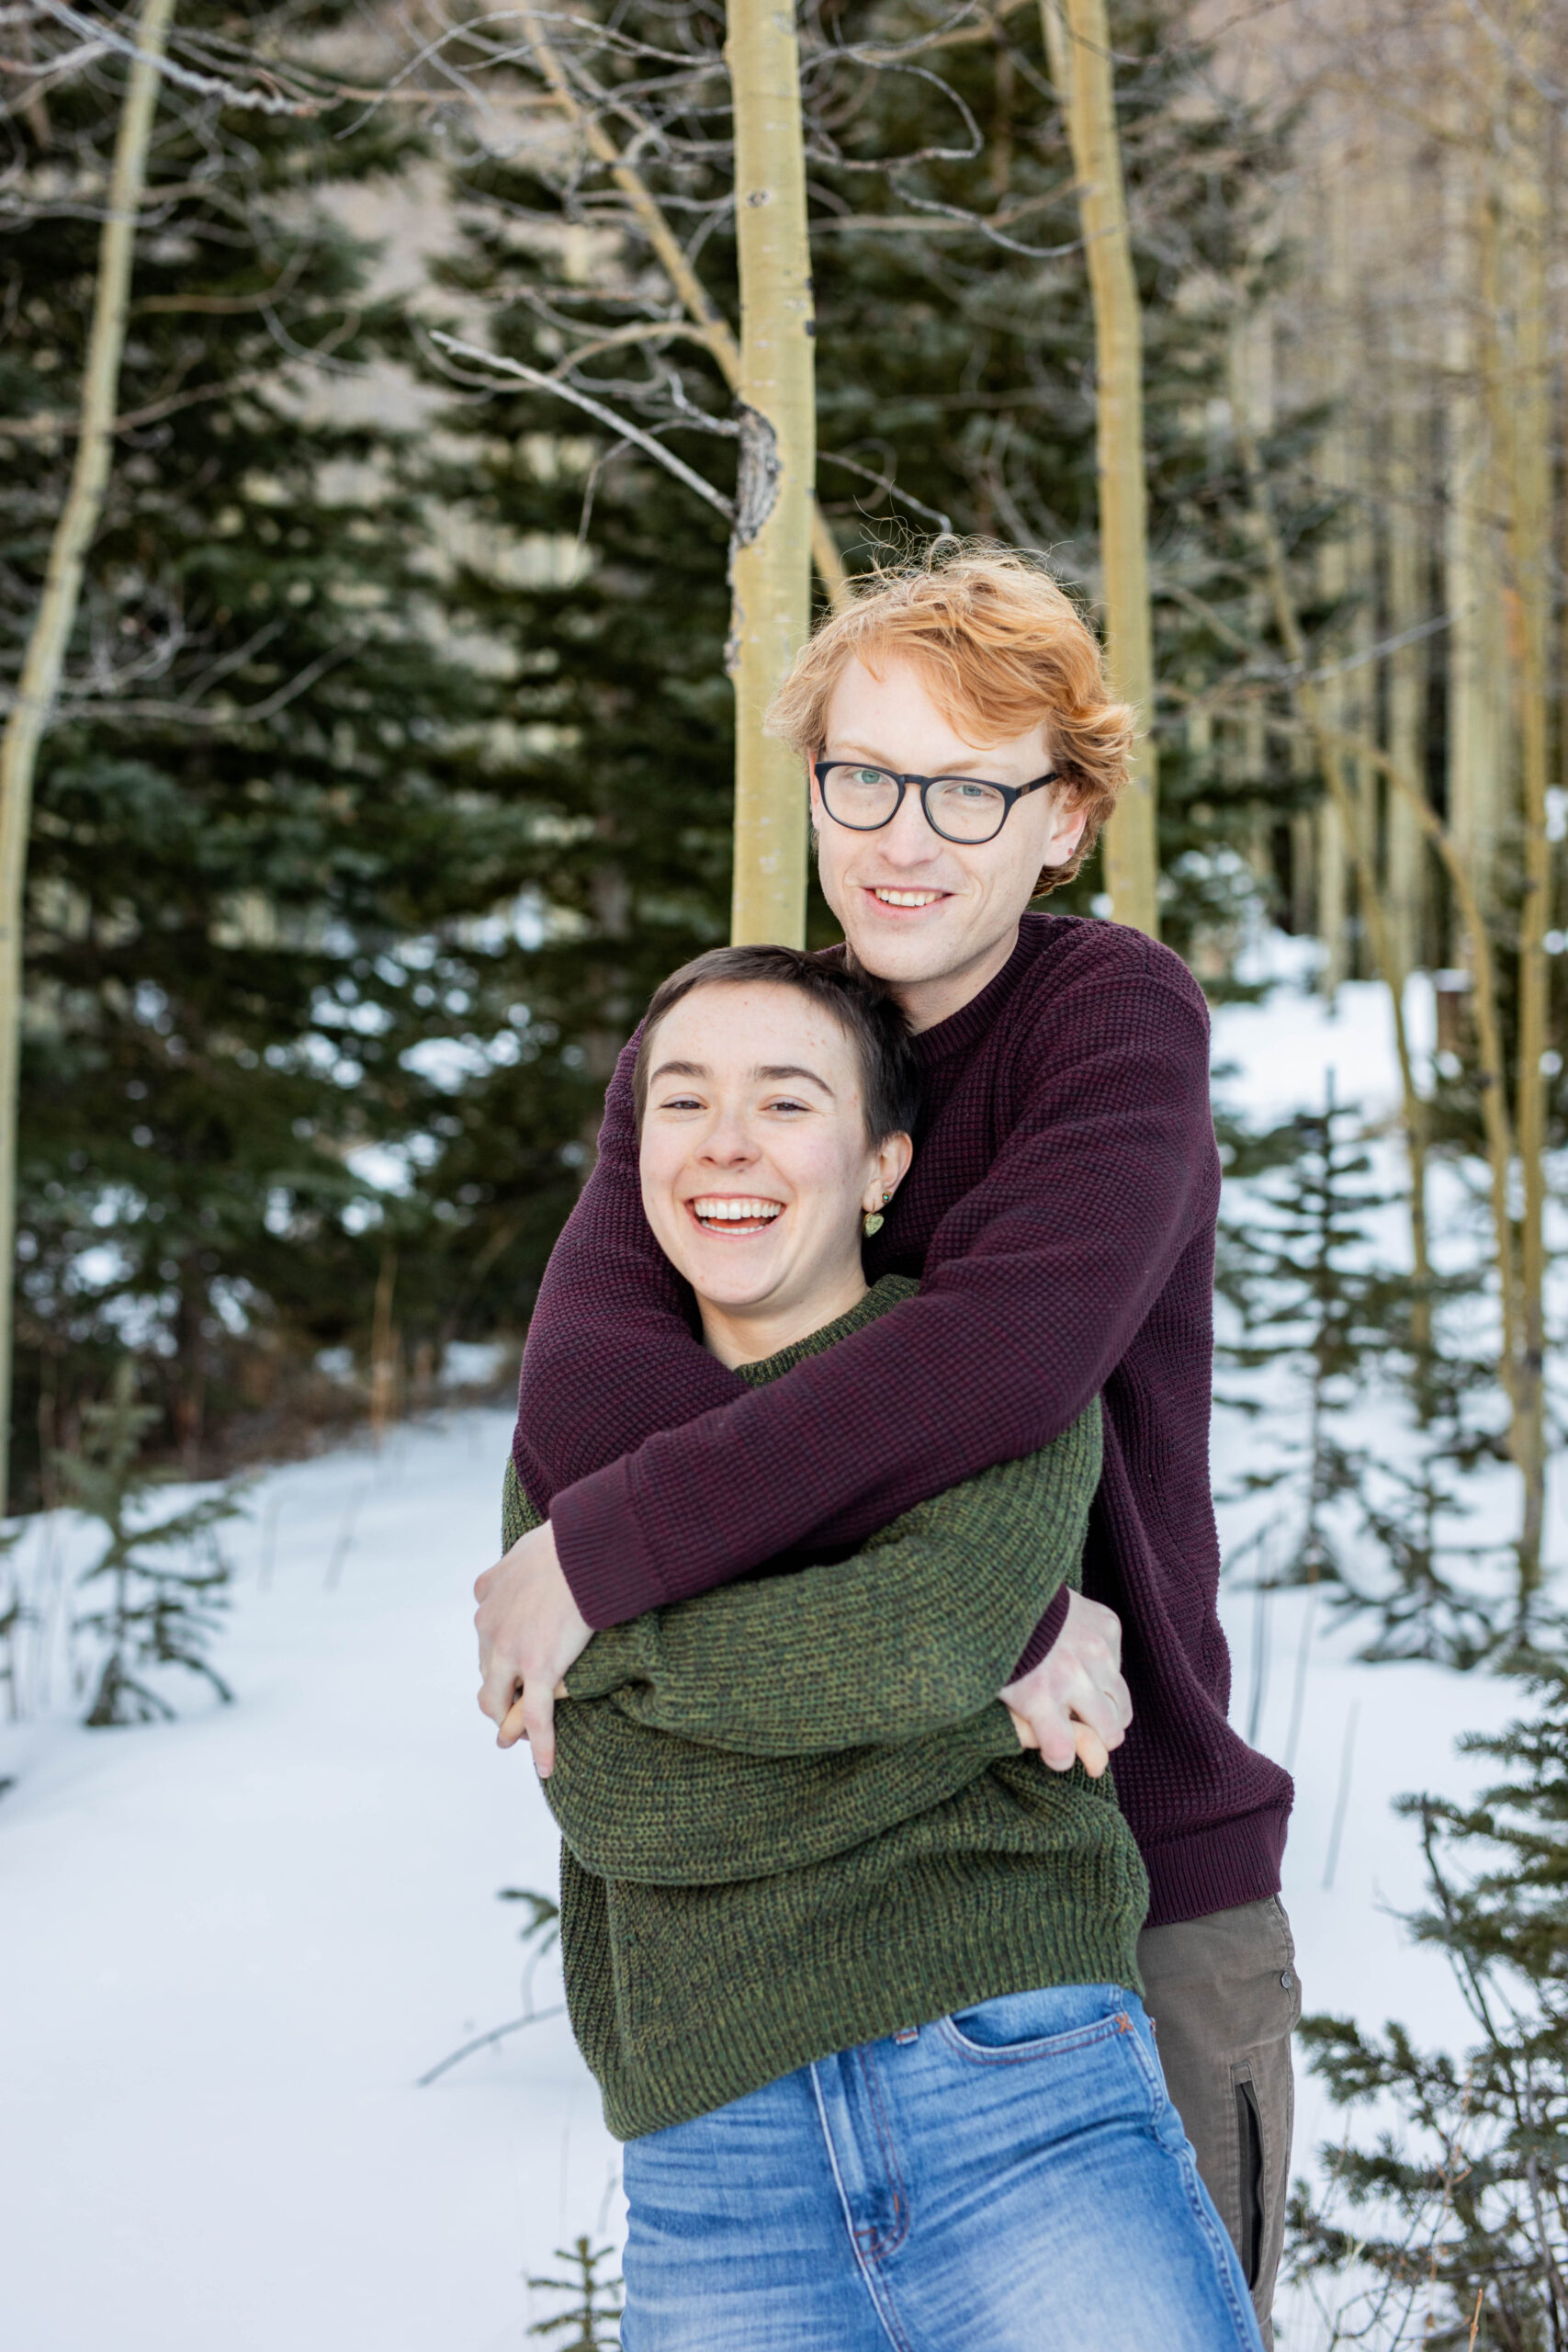 A couple cuddles in a forest of pine trees and aspens. The woman is wearing a green sweater and the man is wearing a red sweater.